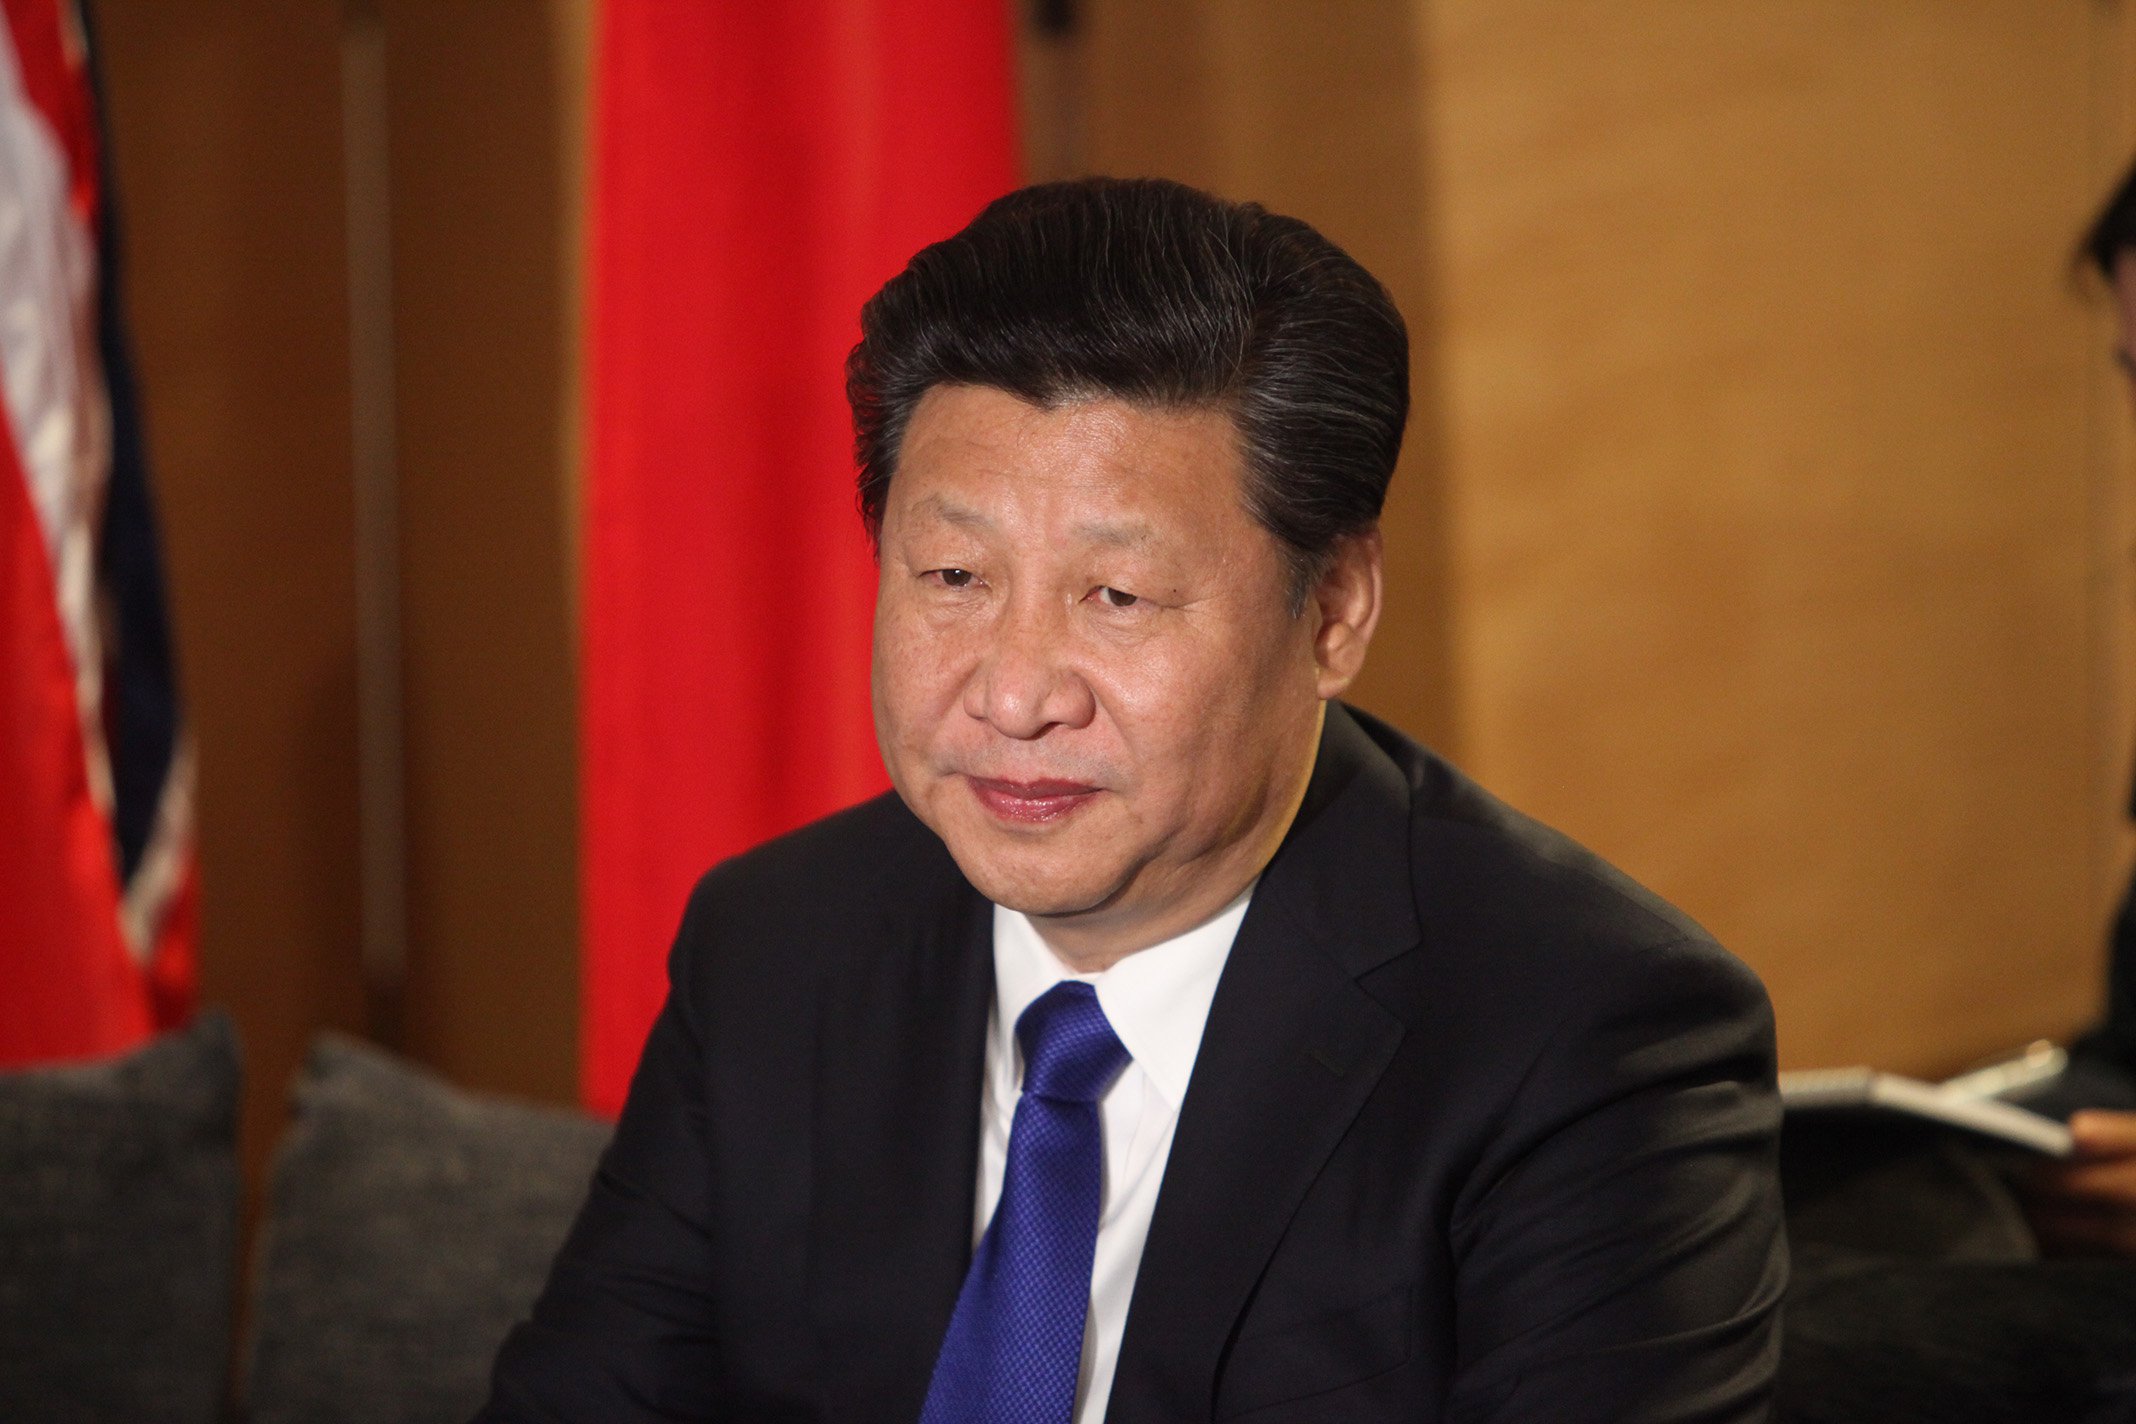 President of China, Xi Jinping, on a state visit to the UK in 2015. Photo: Foreign and Commonwealth Office CC-BY-2.0